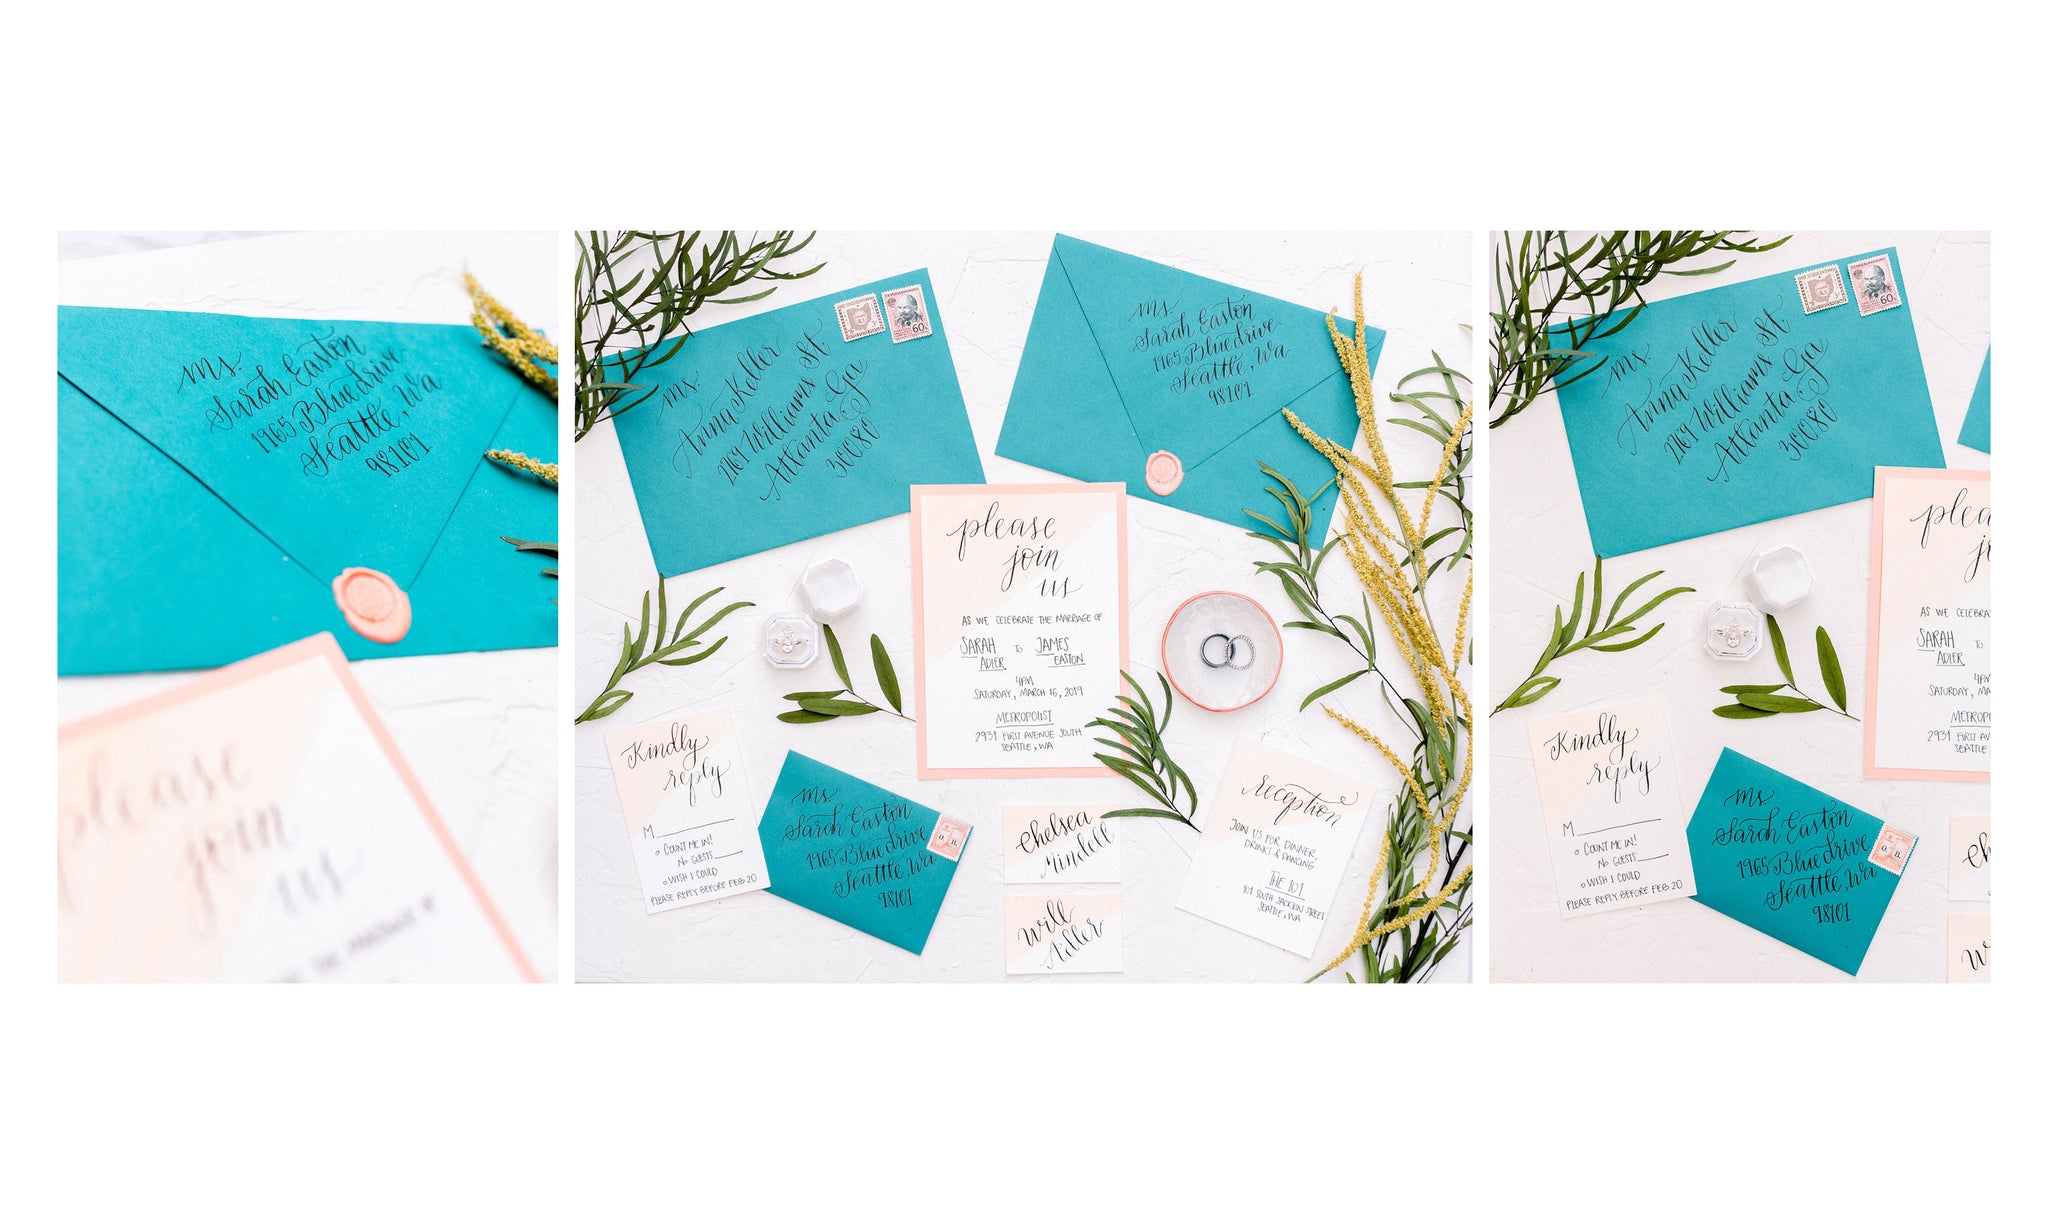 teal envelopes with black calligraphy for wedding invitations by fioribelle